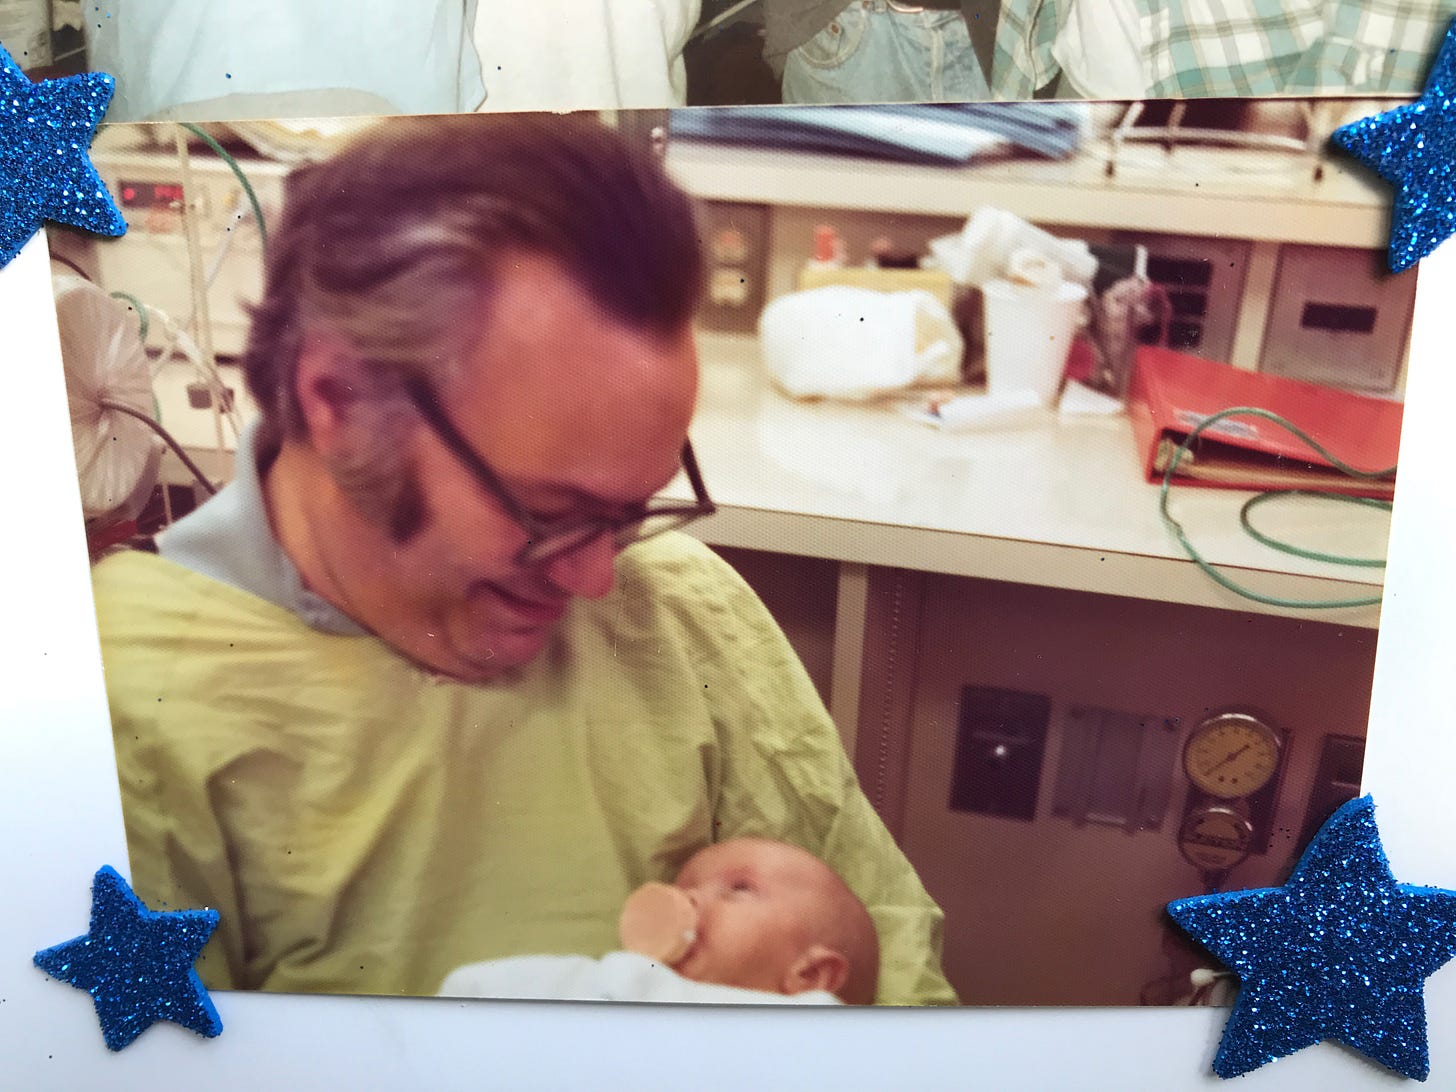 A bespectacled, middle-aged man with swept-back black-and-gray hair and sideburns, and wearing a green hospital smock, holds a tiny baby as he sits in a hospital ward. The baby, sucking on a pacifier, gazes back up into his father's eyes.